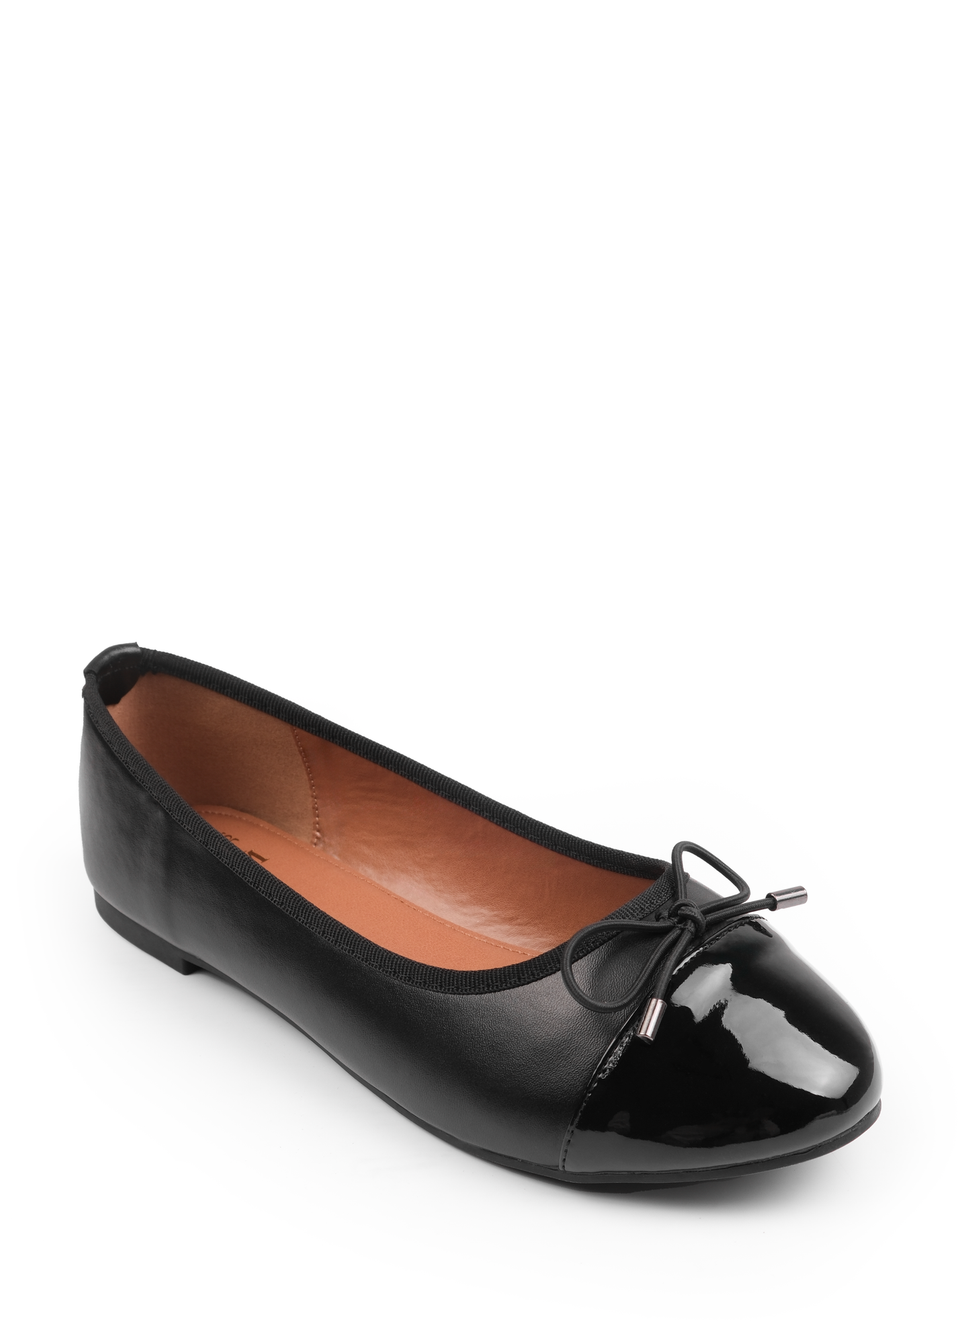 Where's That From Black Janice Ballerina Flats With Bow Detail